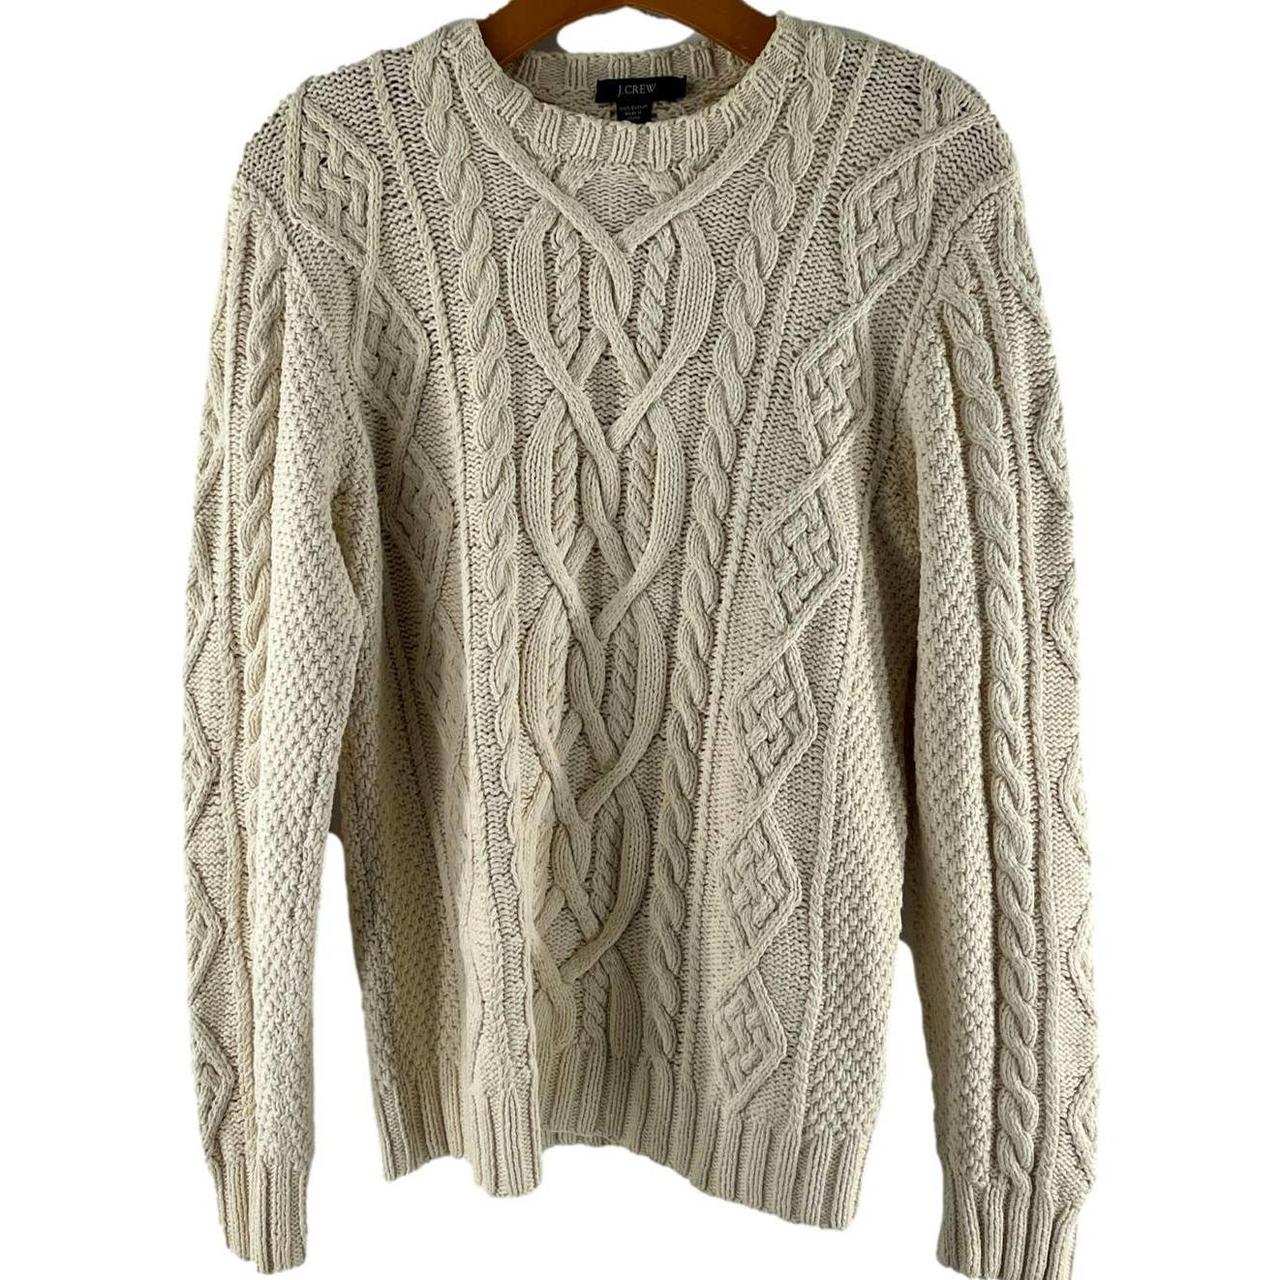 J. Crew classic off-white cable knit sweater. Crew... - Depop